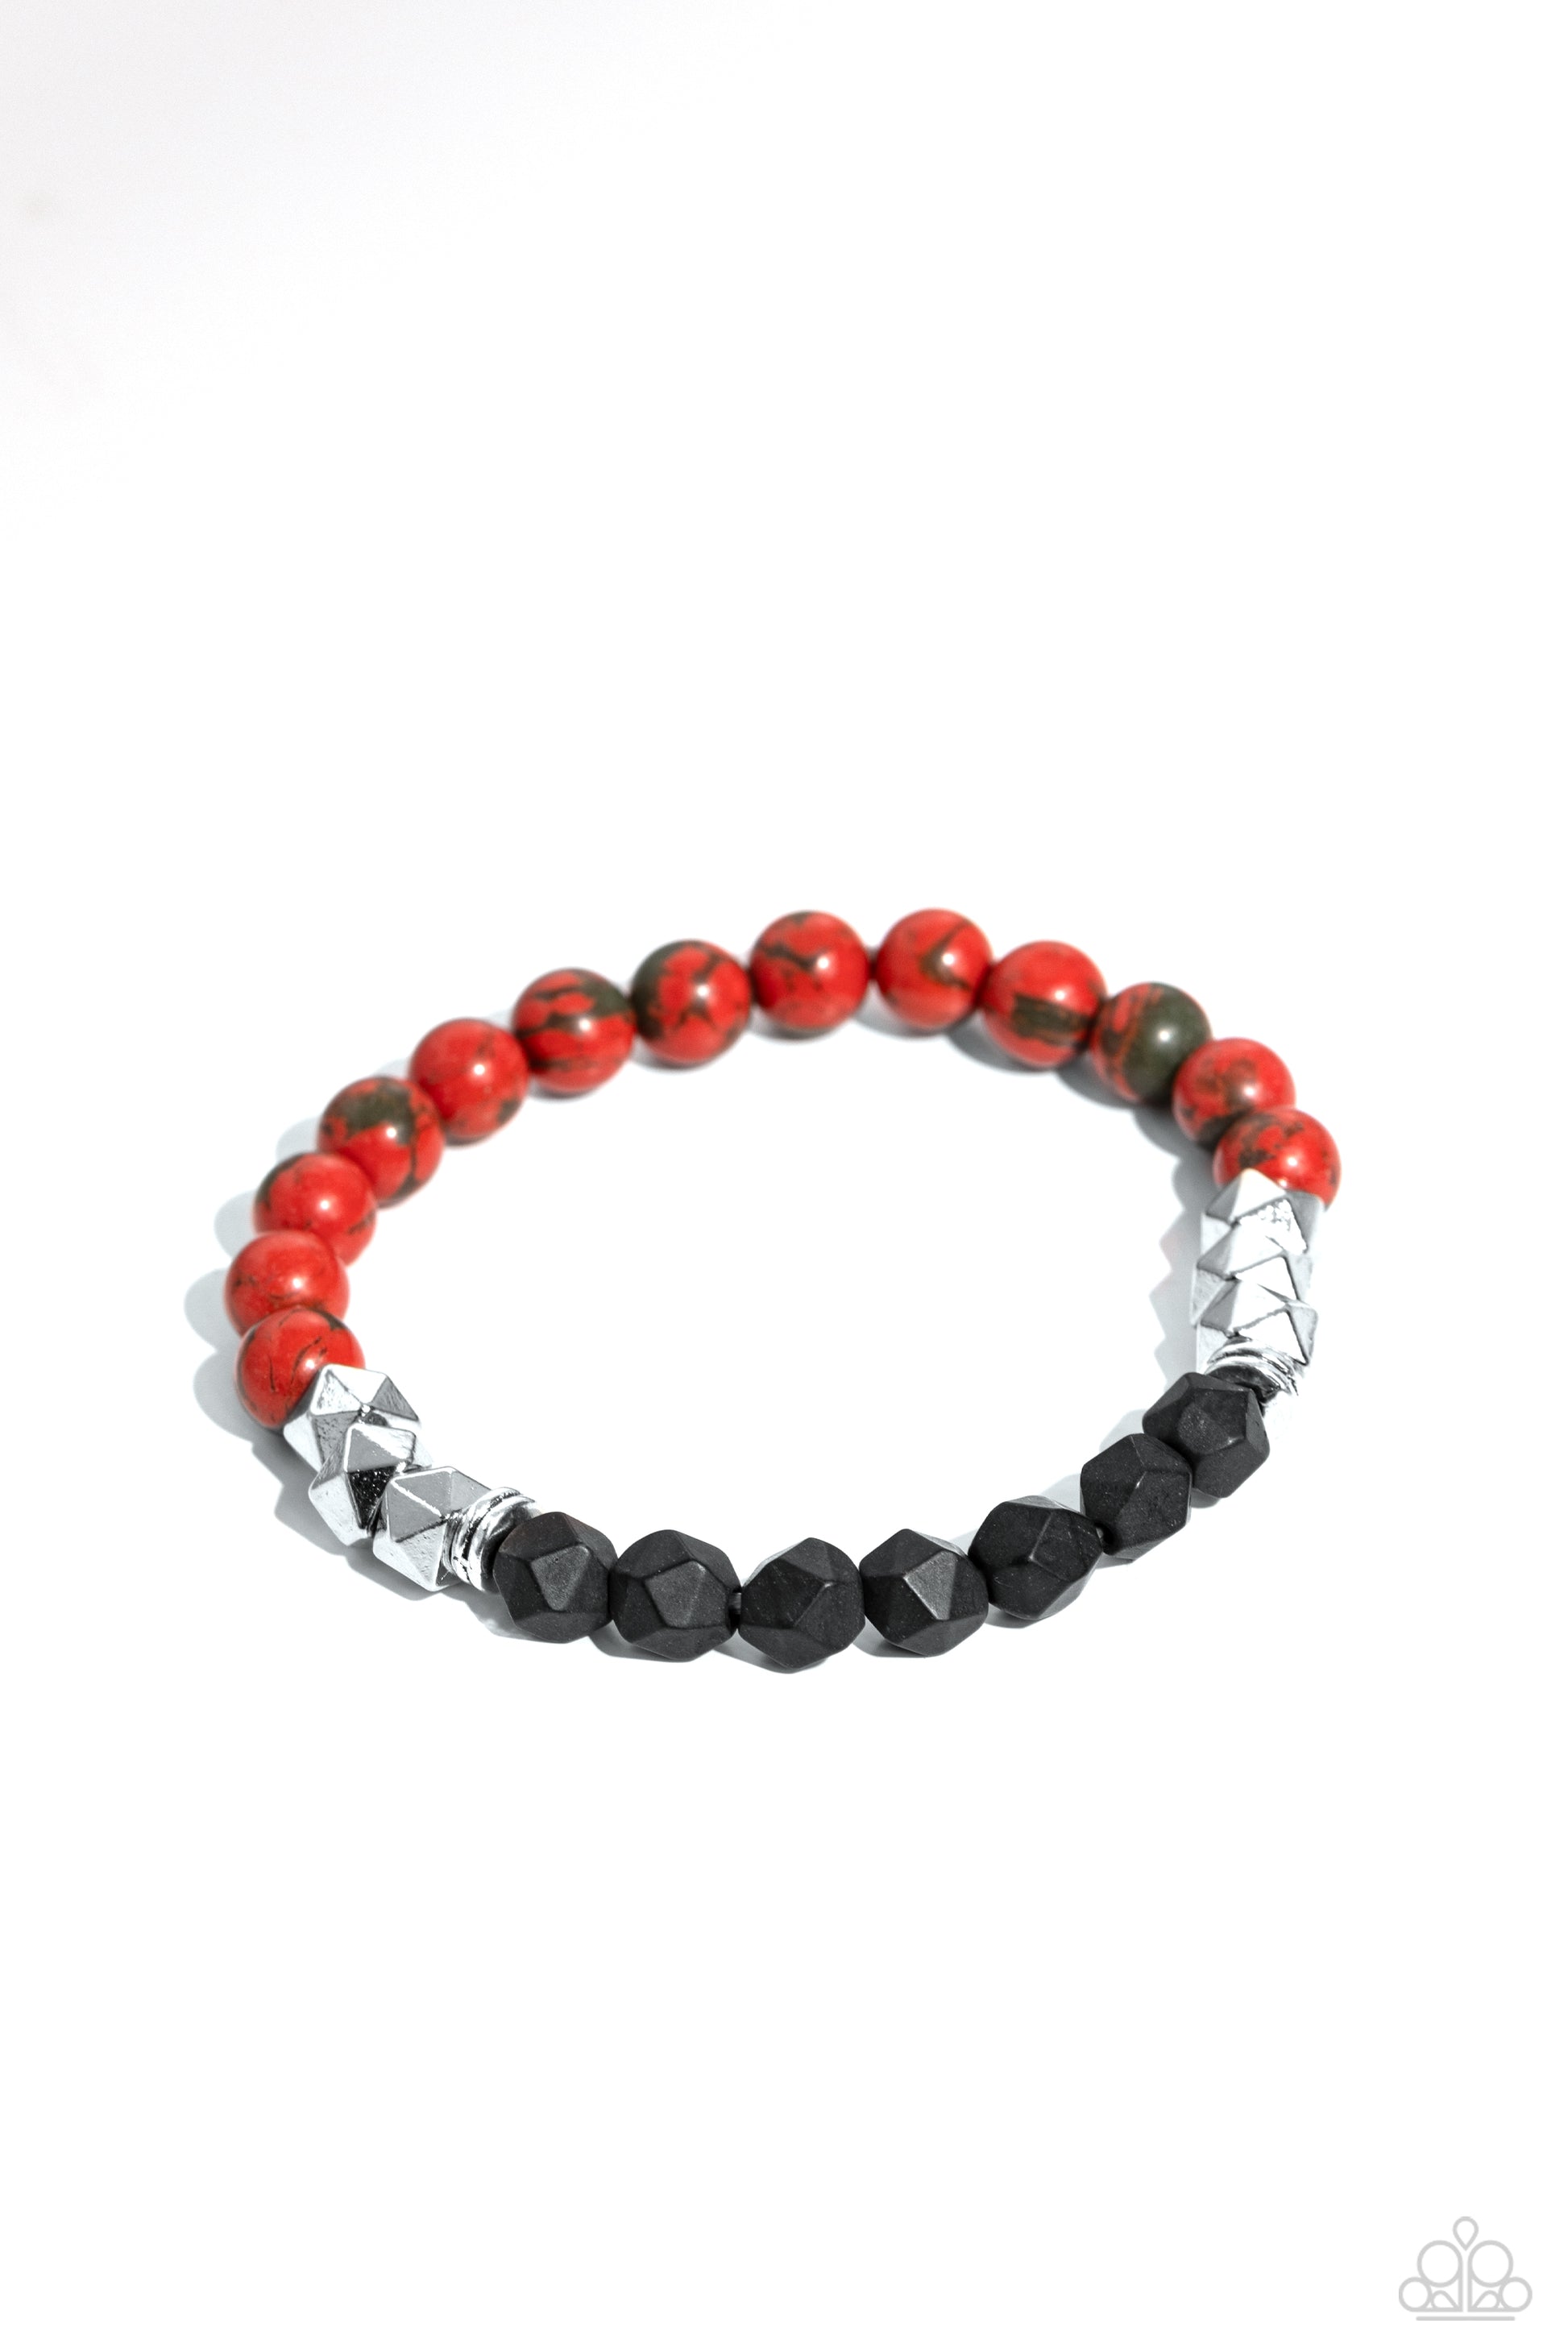 Defaced Deed Orange Stone Unisex Stretch Bracelet - Paparazzi Accessories  Featuring black marbling, an earthy collection of orange stone beads, defaced black and silver beads, and metallic accents are threaded along a stretchy band around the wrist for a seasonal look.  Sold as one individual bracelet.  SKU: P9SE-UROG-076XX